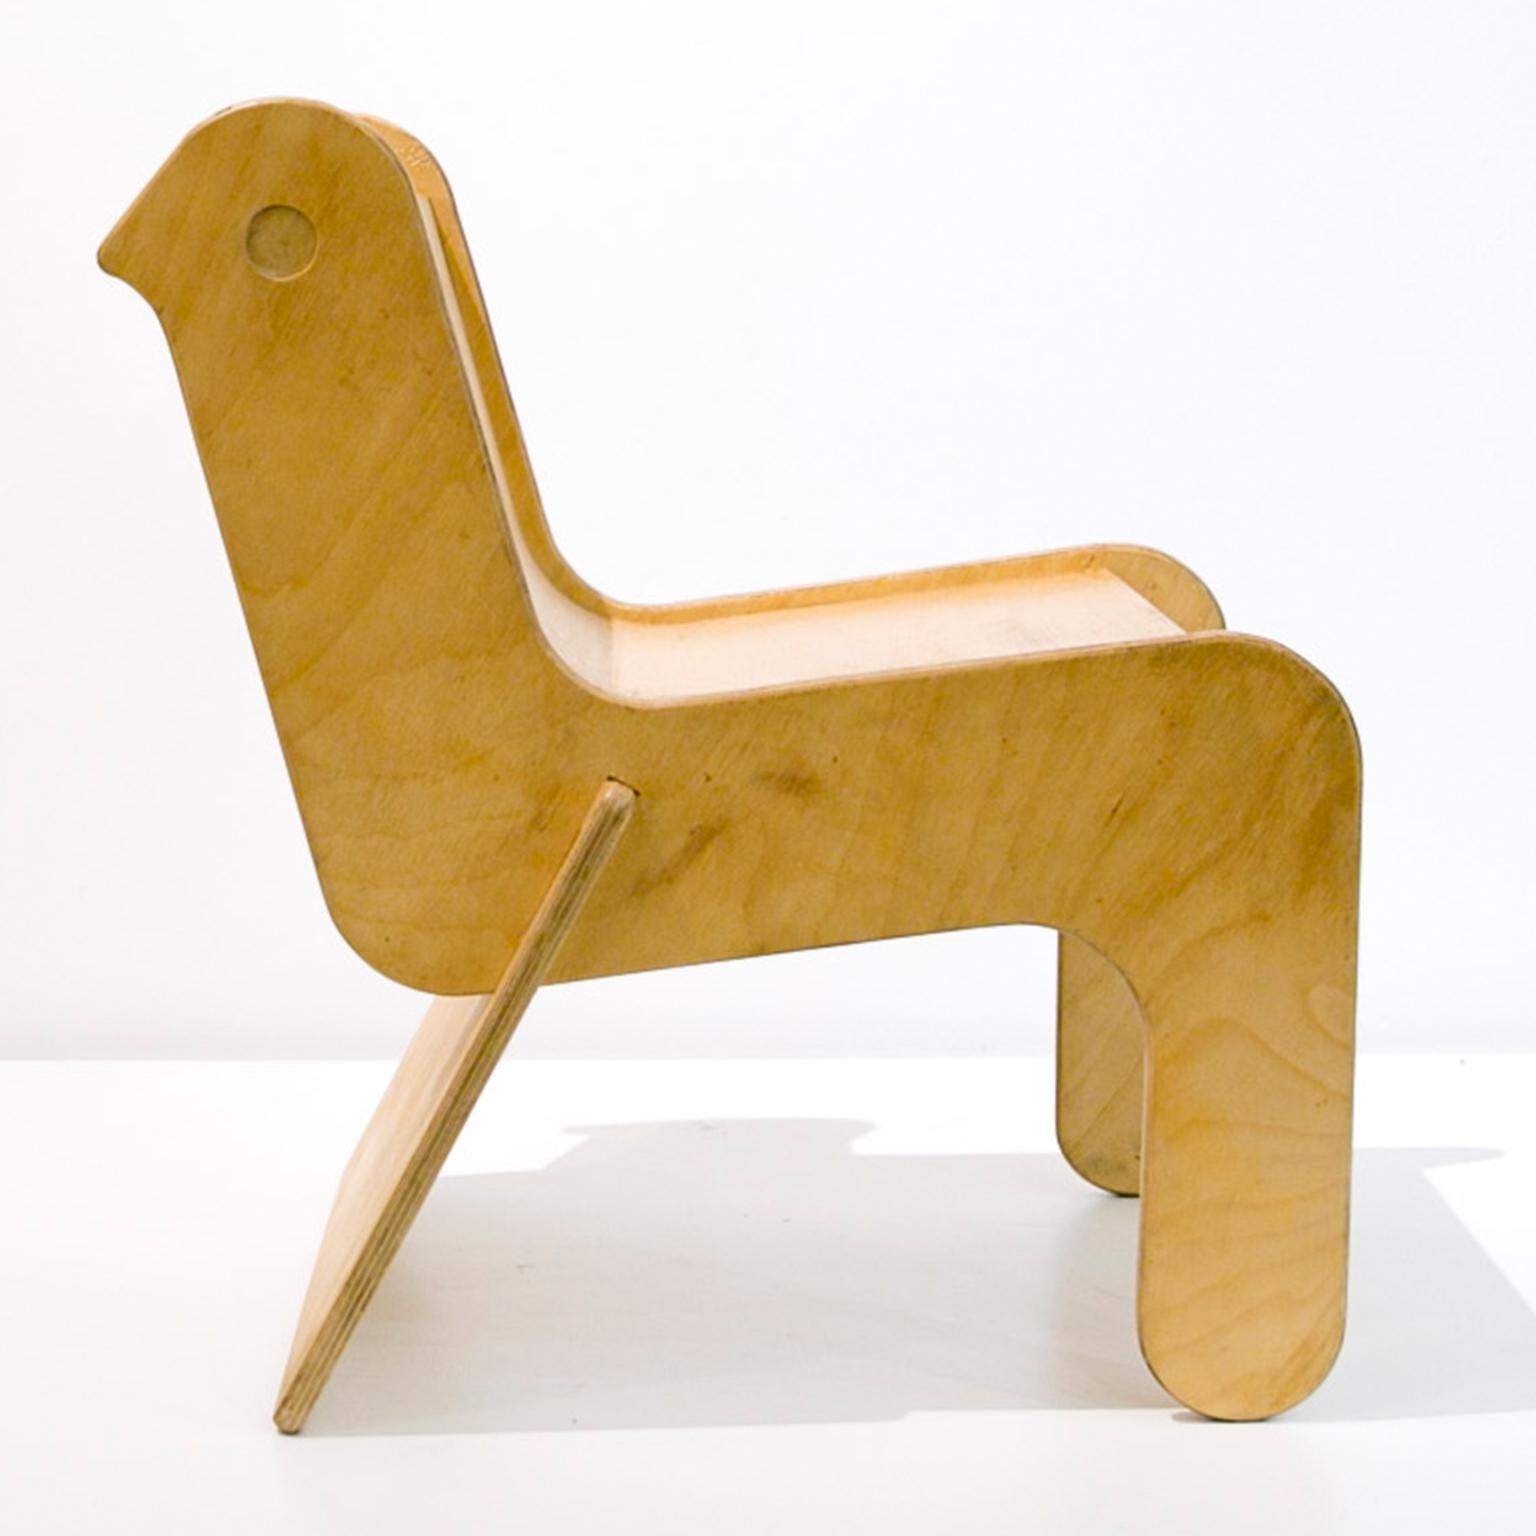 In 1999 Robin Day supported a charitable exhibition conceived by twentytwentyone (London) to raise money for the Children’s Hope Foundation.

Along with 12 other leading designers Robin was invited to design a child’s chair from a single piece of